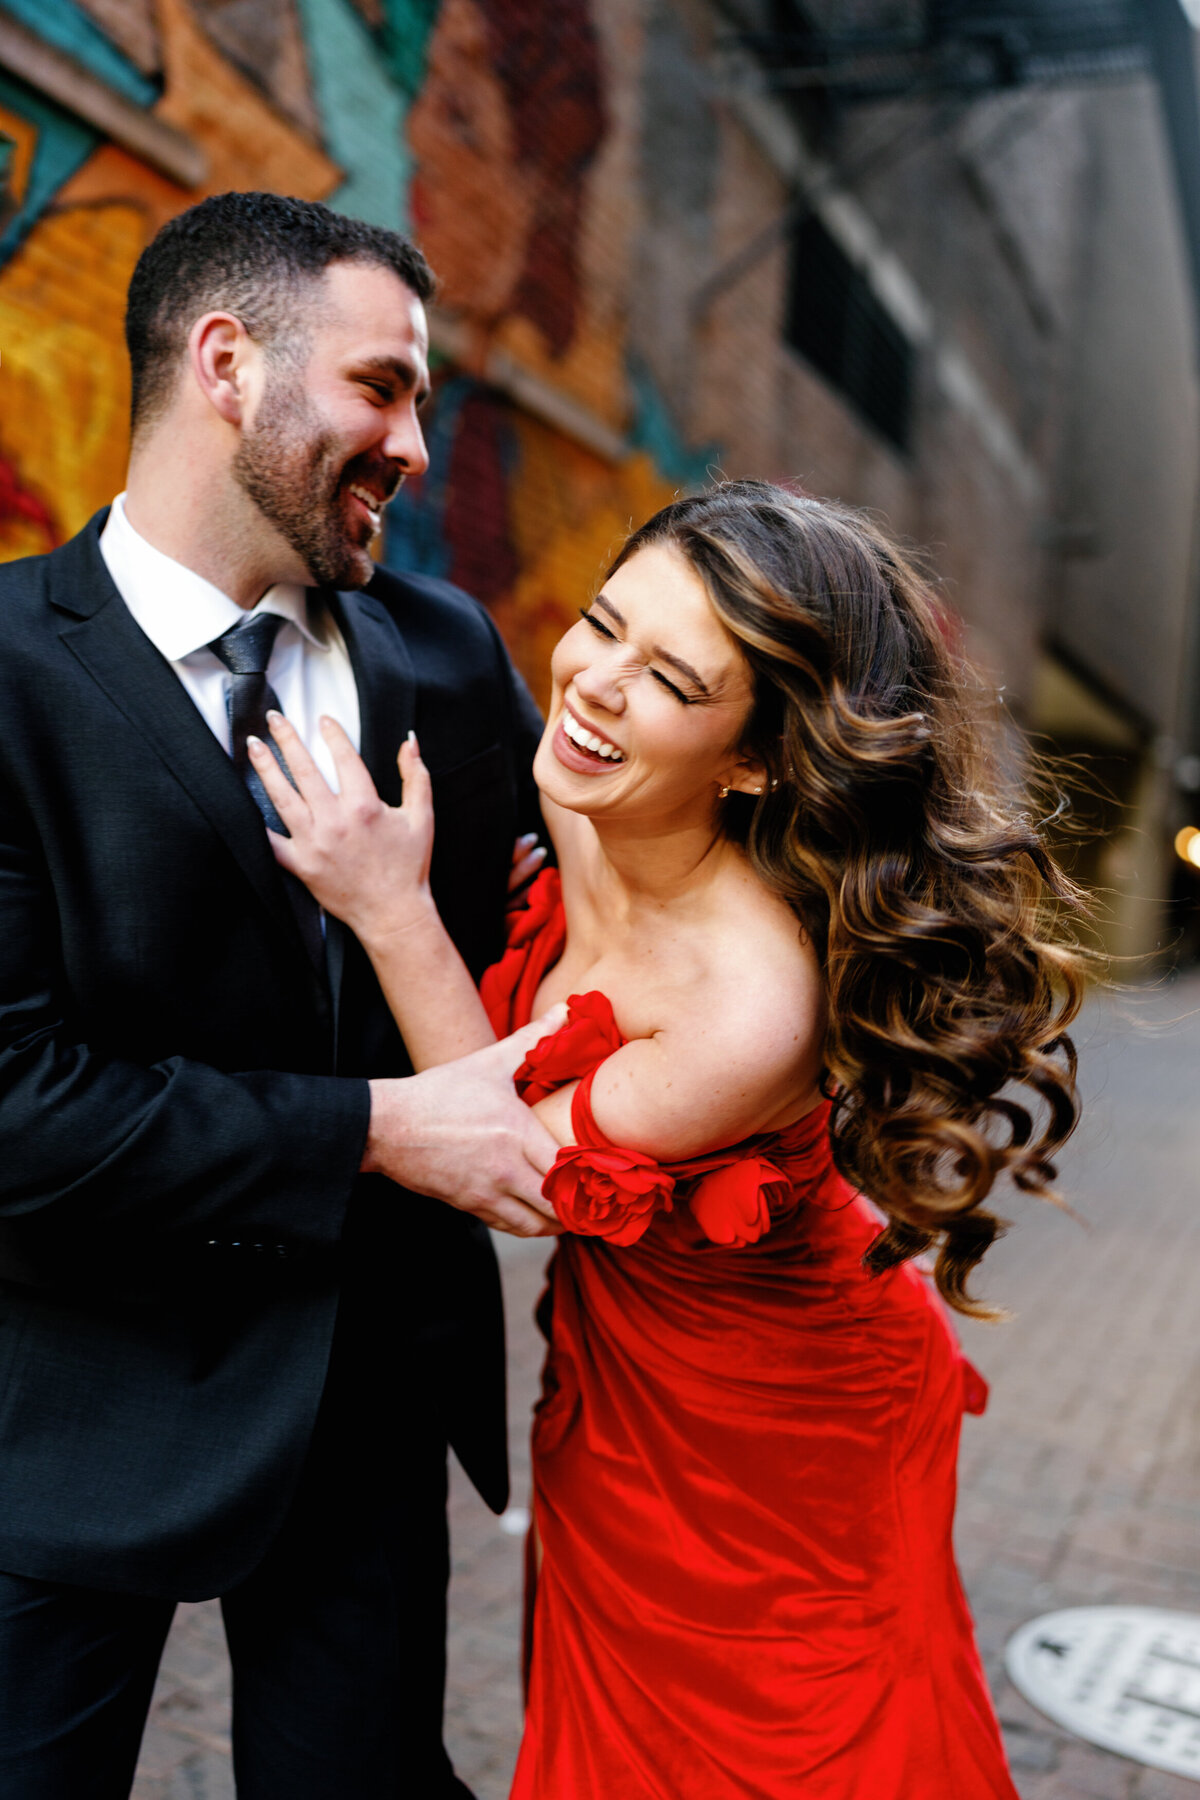 Aspen-Avenue-Chicago-Wedding-Photographer-Union-Station-Chicago-Theater-Engagement-Session-Timeless-Romantic-Red-Dress-Editorial-Stemming-From-Love-Bry-Jean-Artistry-The-Bridal-Collective-True-to-color-Luxury-FAV-89